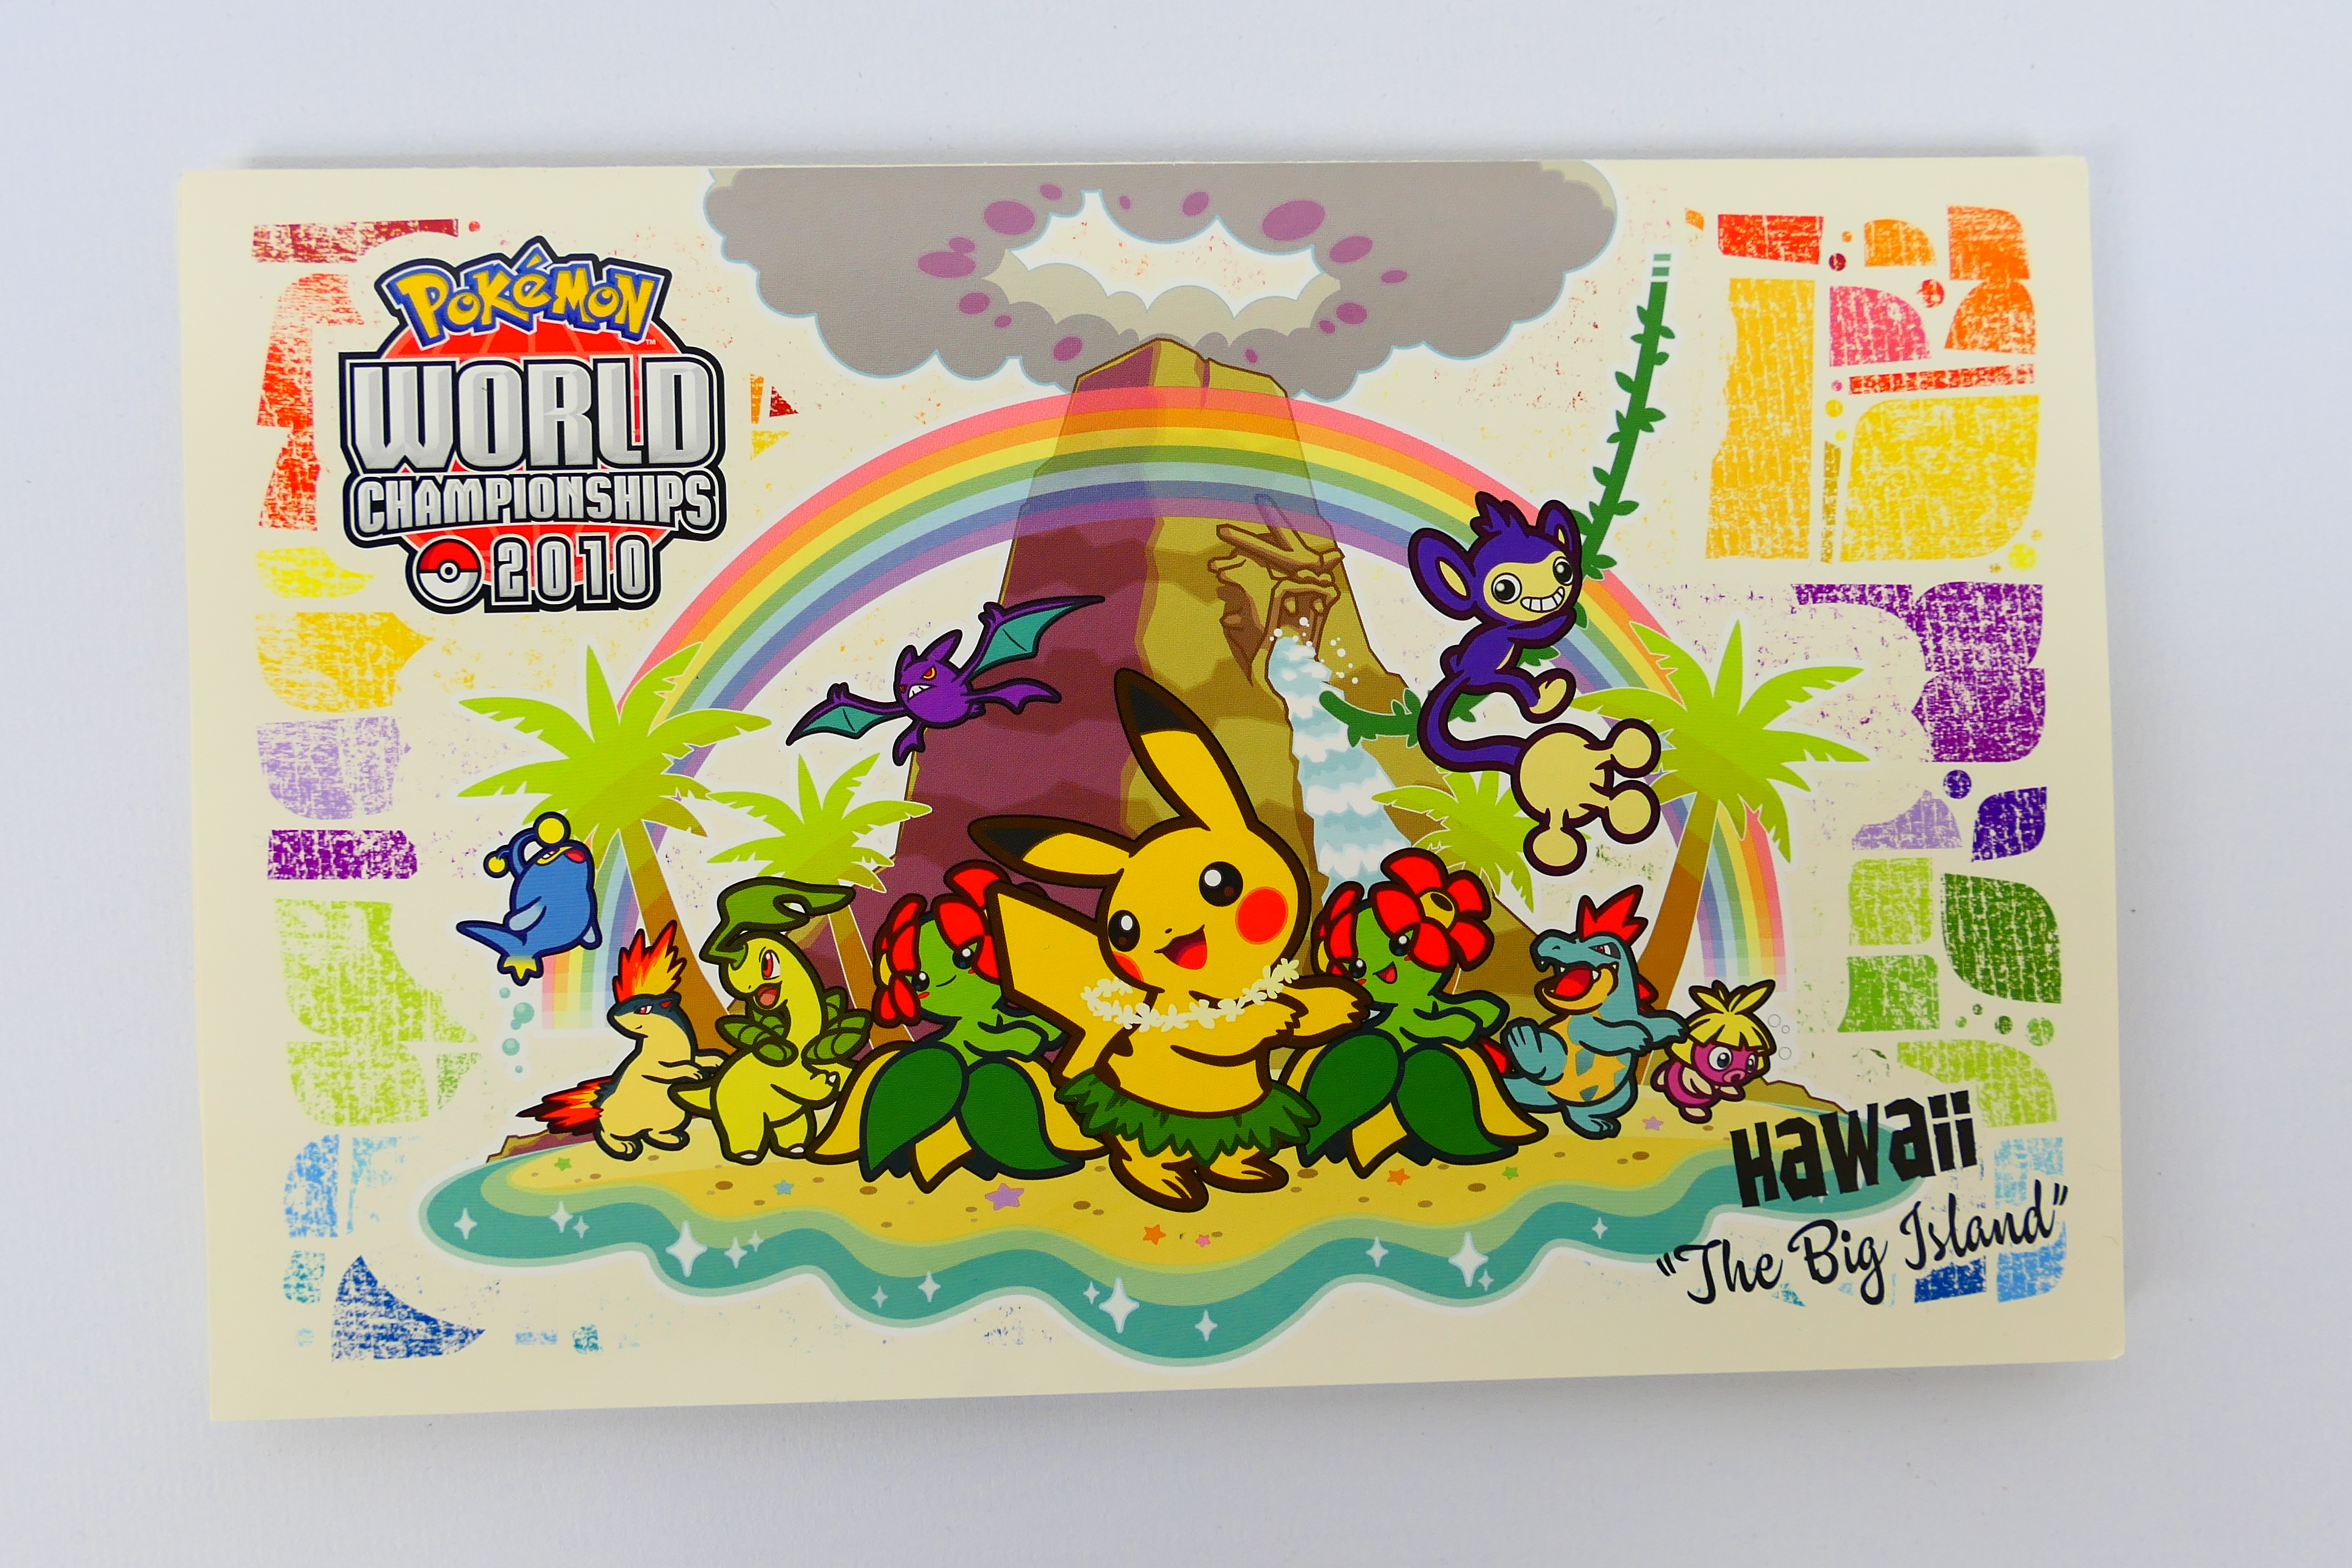 Pokemon - An Official Pokemon TCG World Championships Competitor Pack for the 2010 tournament - Image 7 of 7